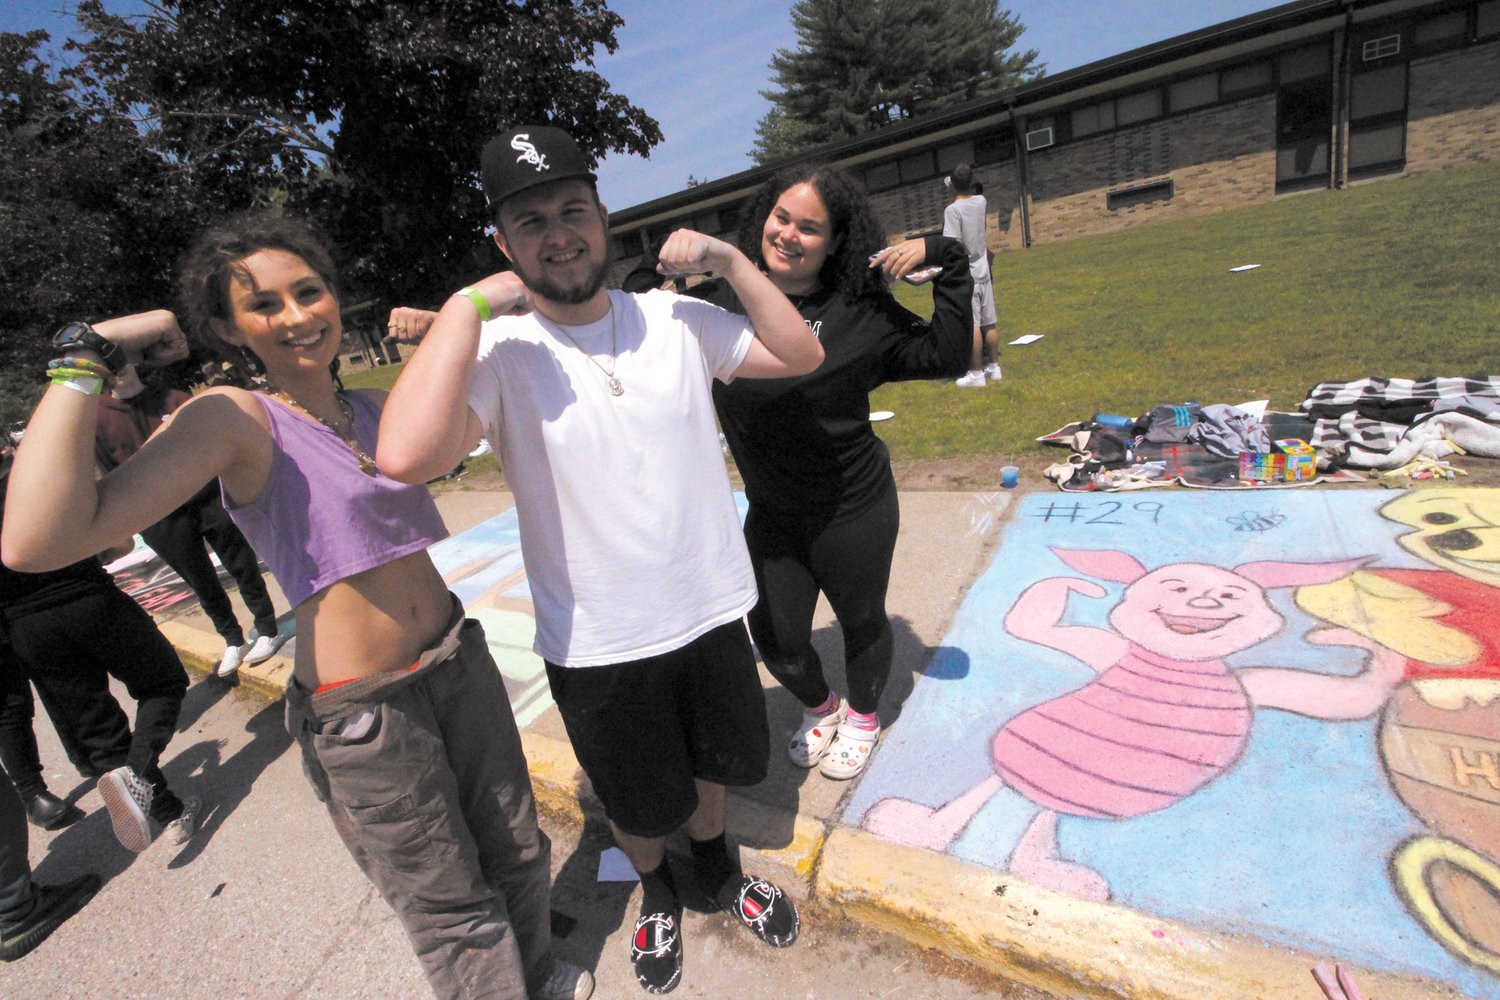 PUTTING MUSCLE IN THEIR WORK: Cailyn McNamar, JT Robertson  and Model Cabreja stand over their completed panel.